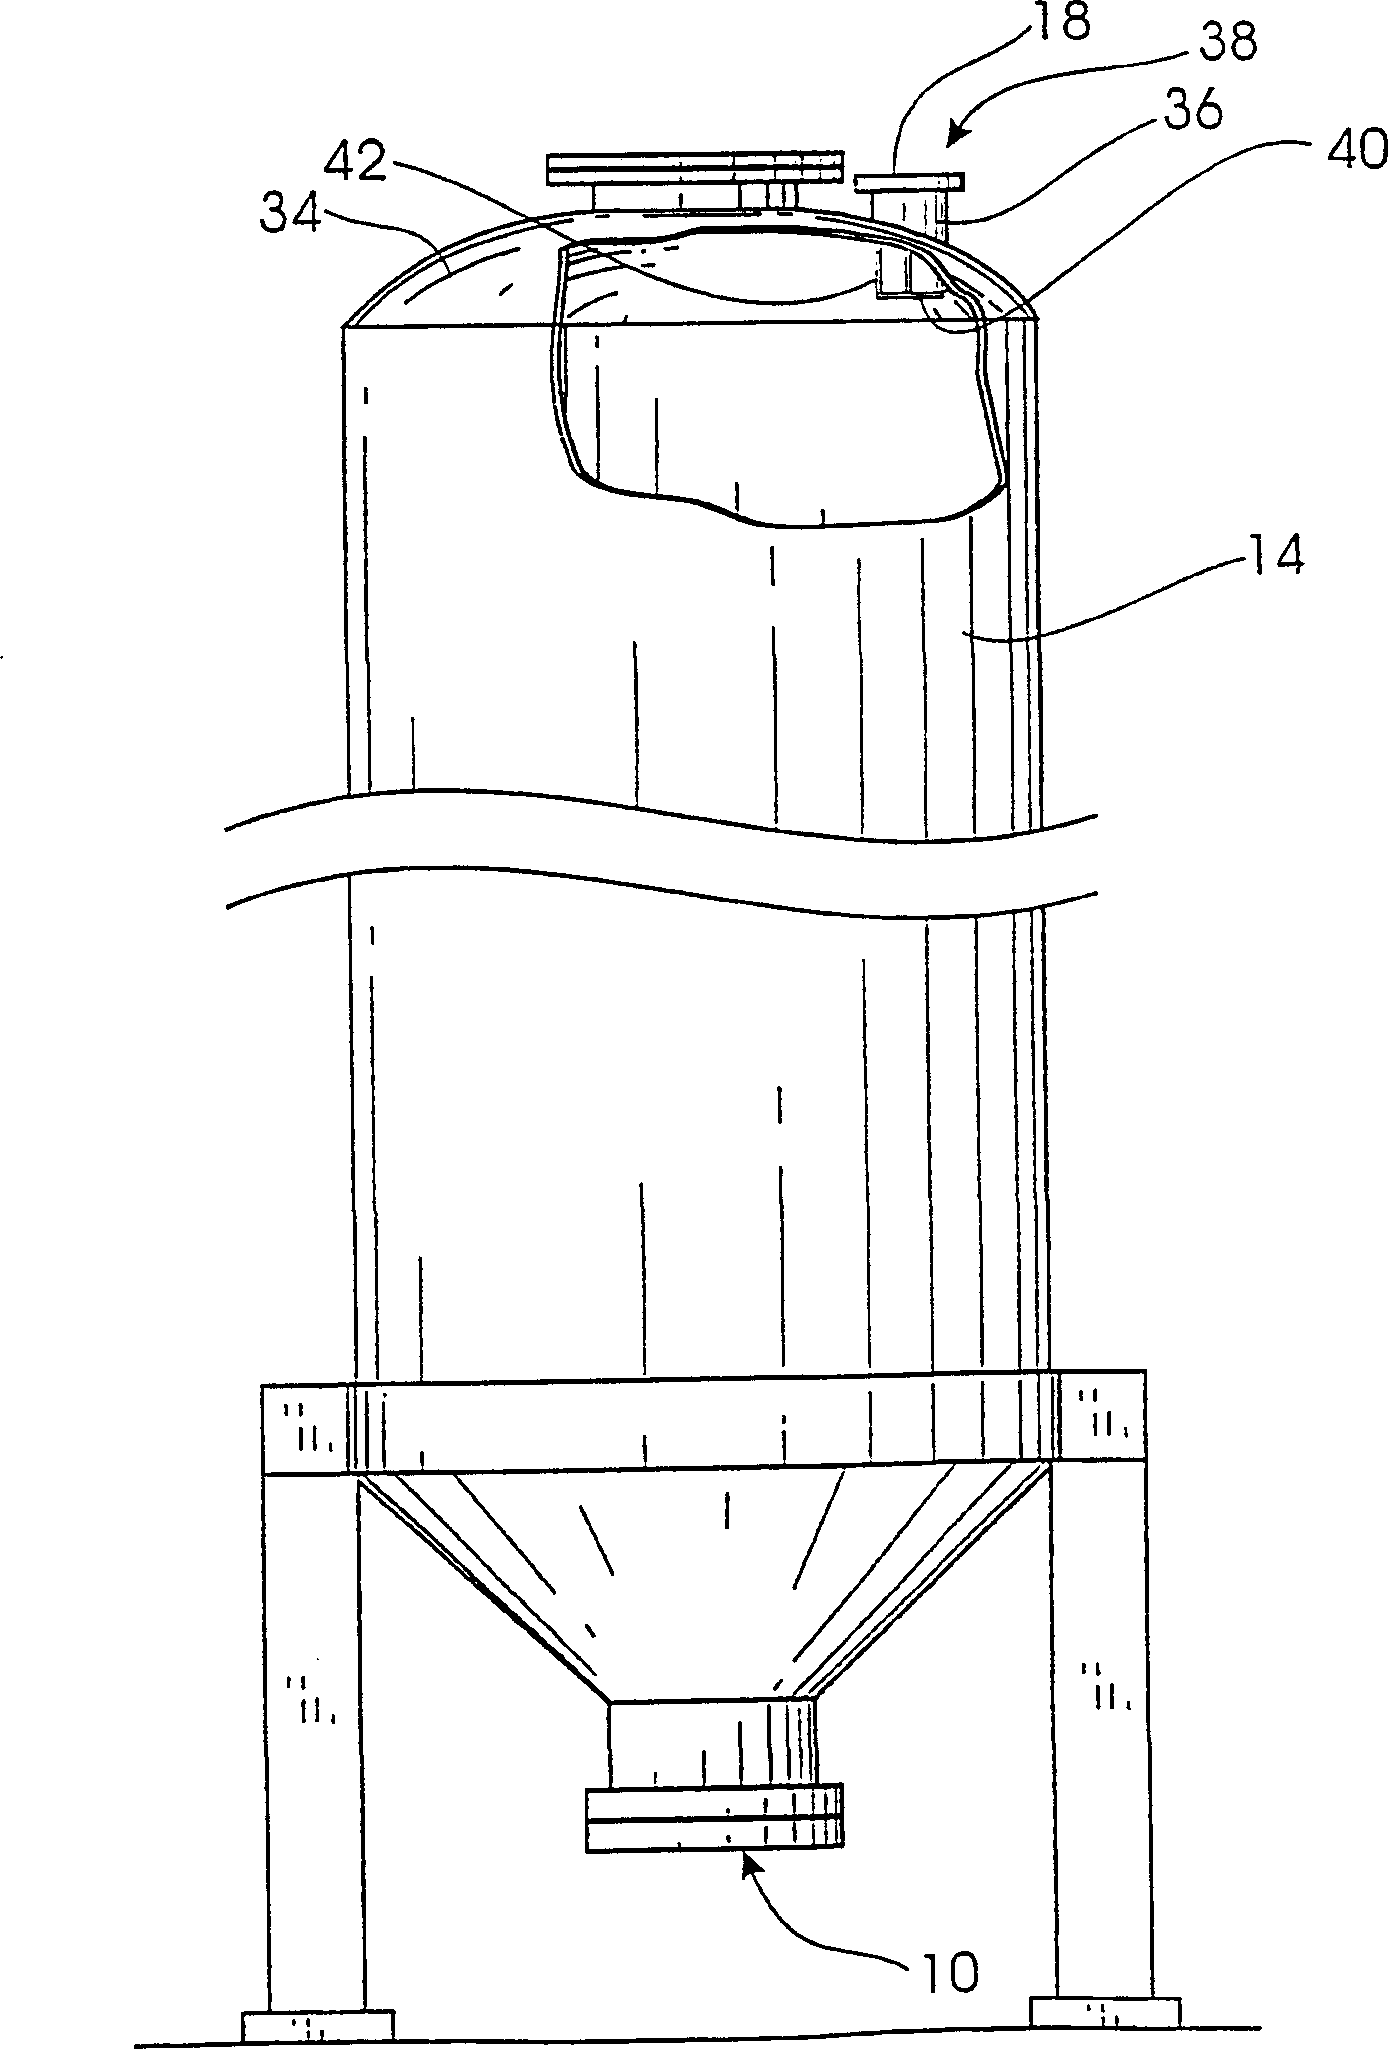 Coke drun with overhead deflector plate and method using this